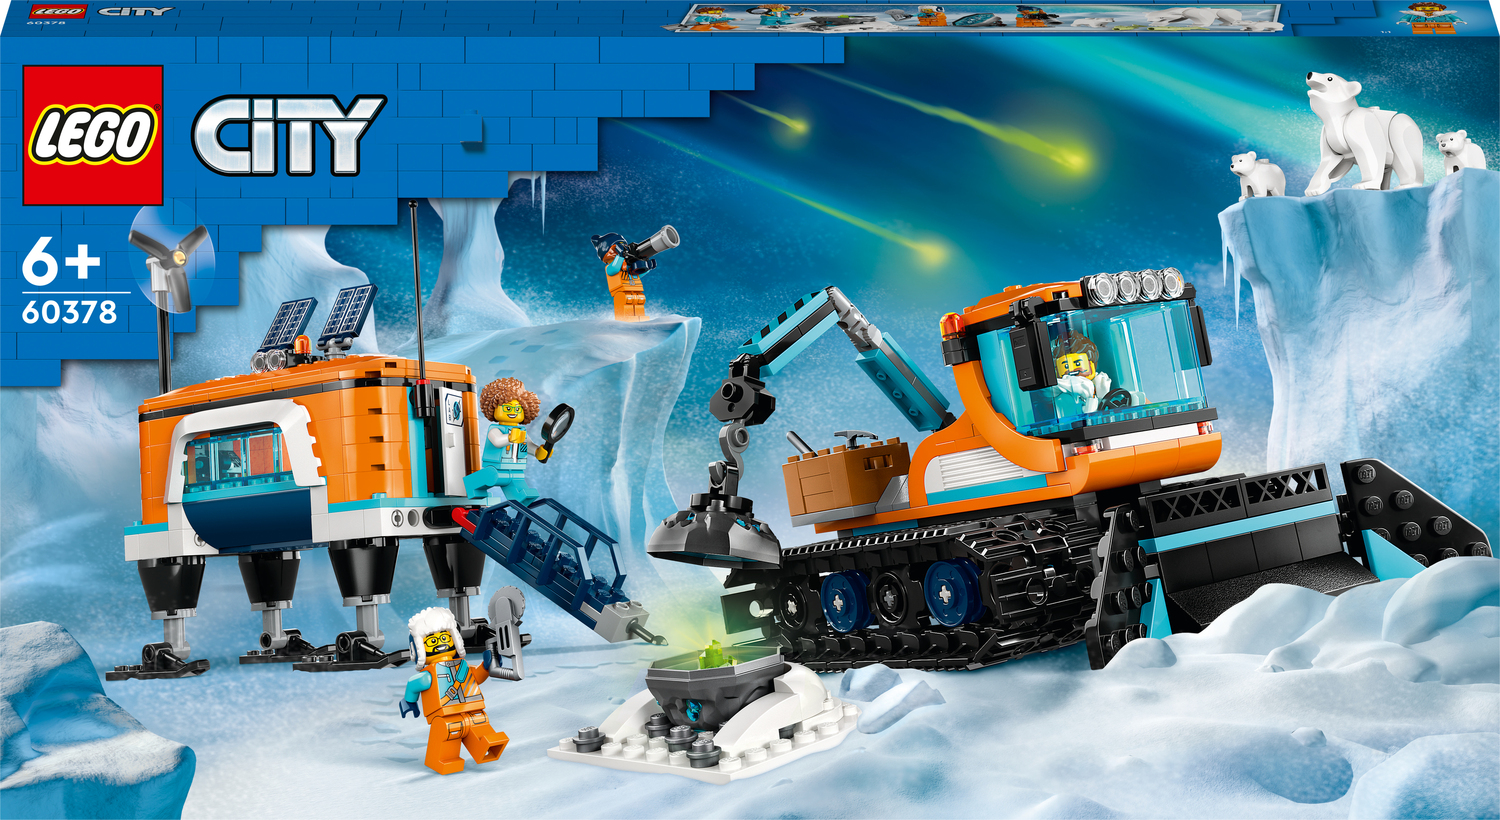 LEGO City Arctic Explorer Vehicle and Mobile Lab